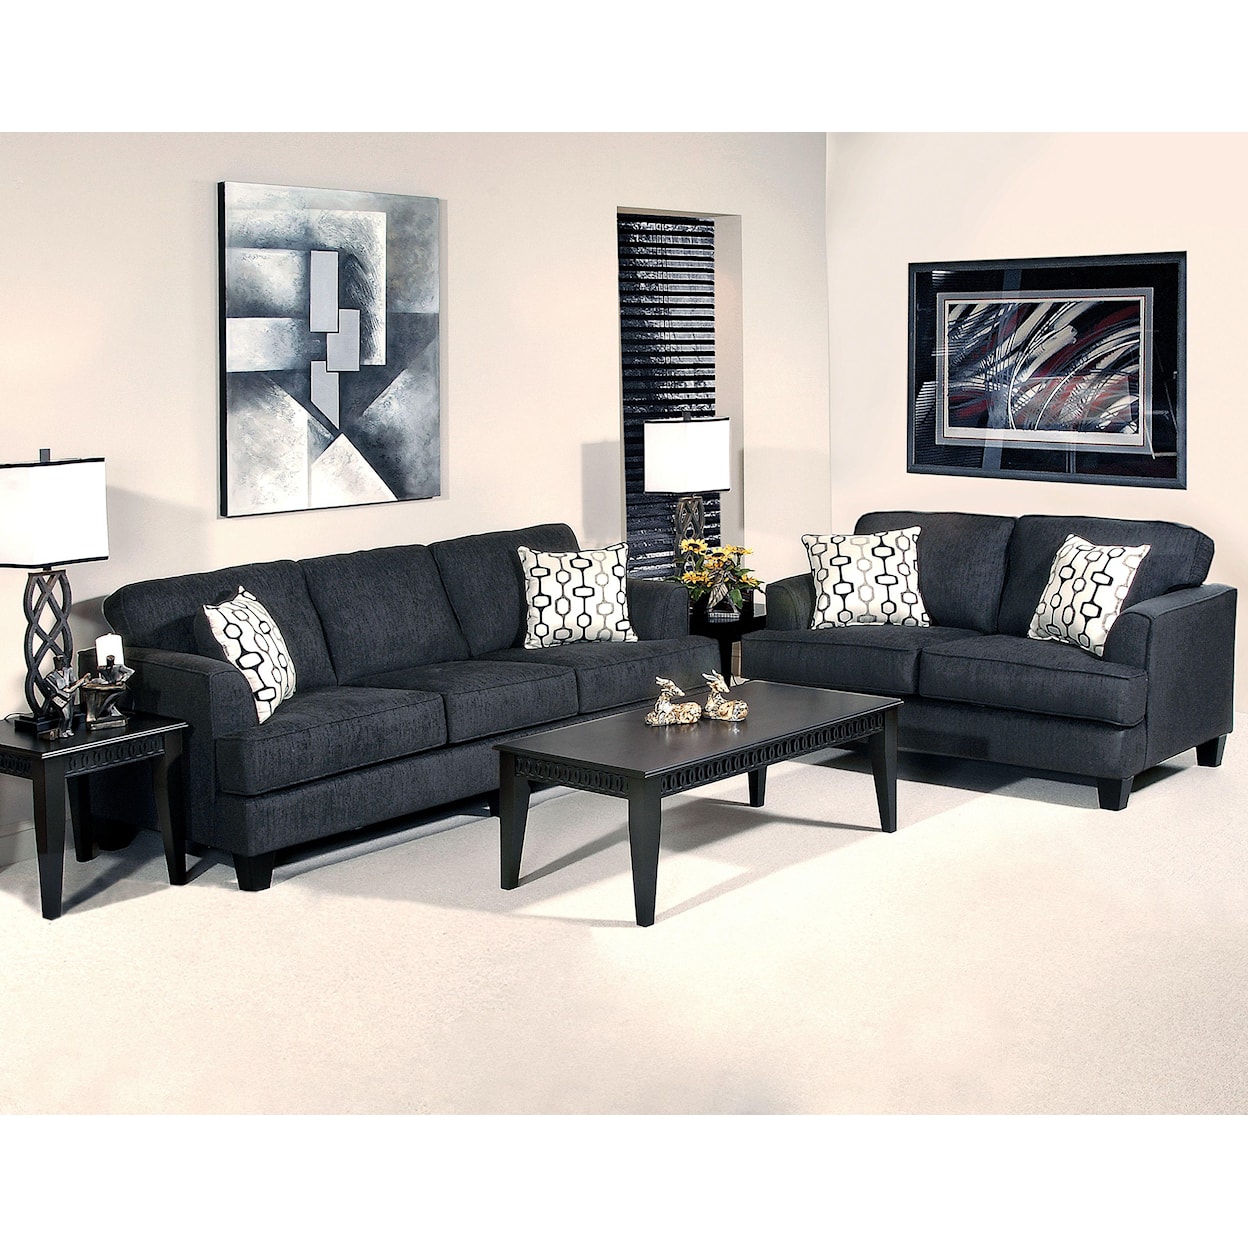 Serta Upholstery by Hughes Furniture 5600 Contemporary Sofa